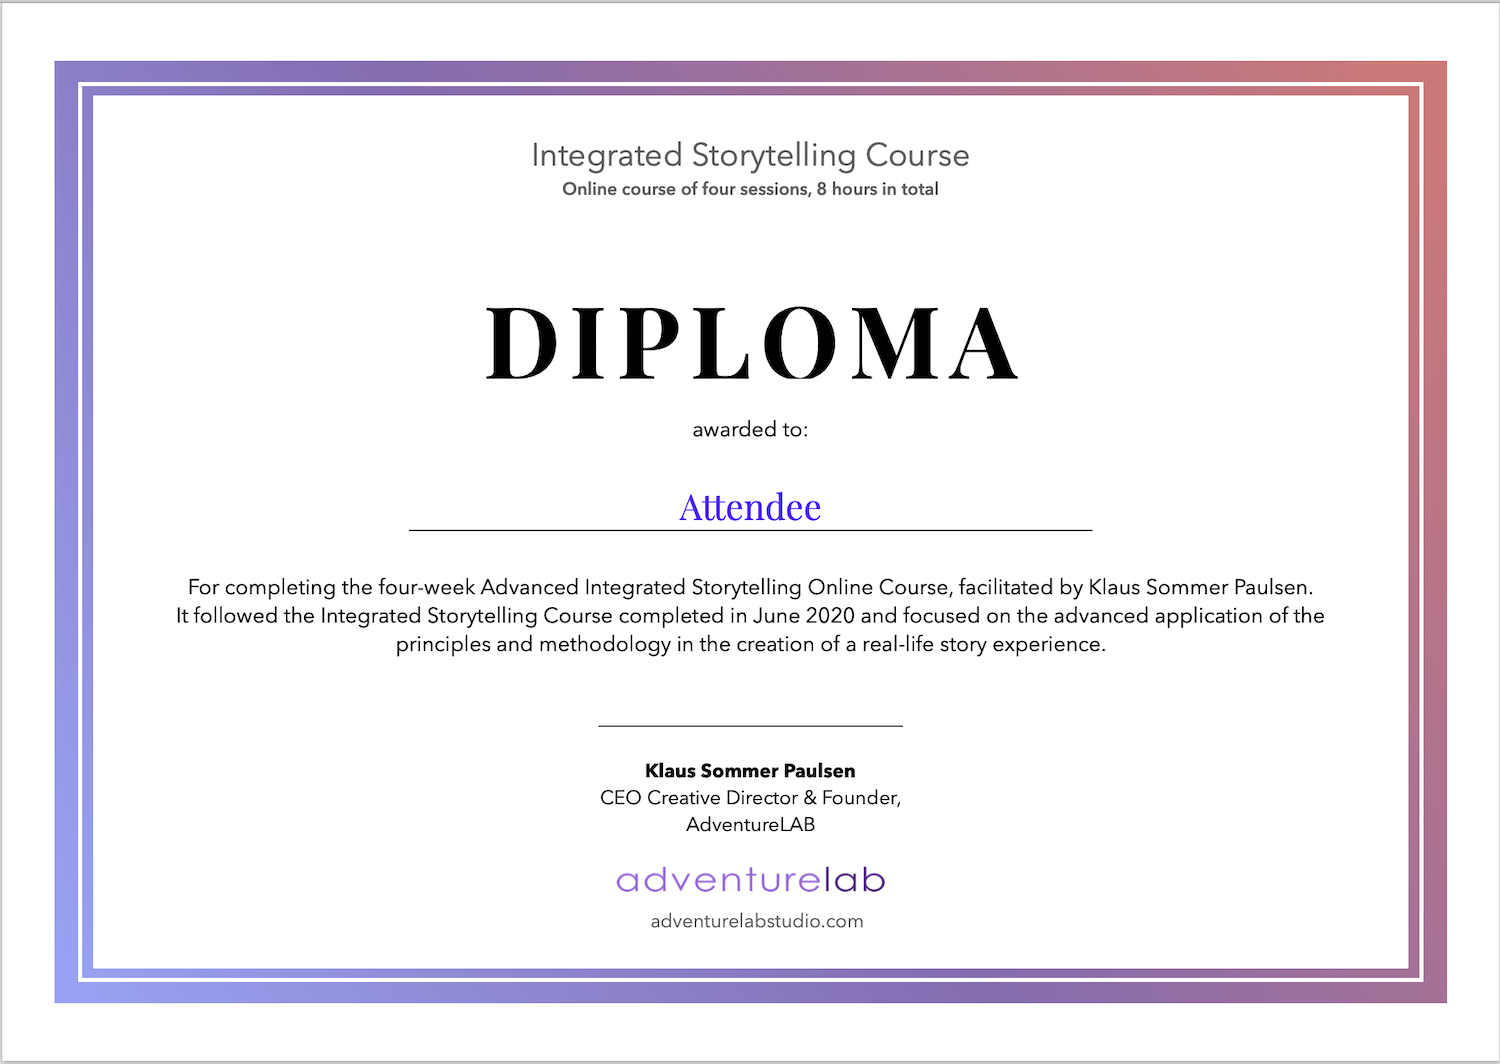 Integrated Storytelling Course Diploma